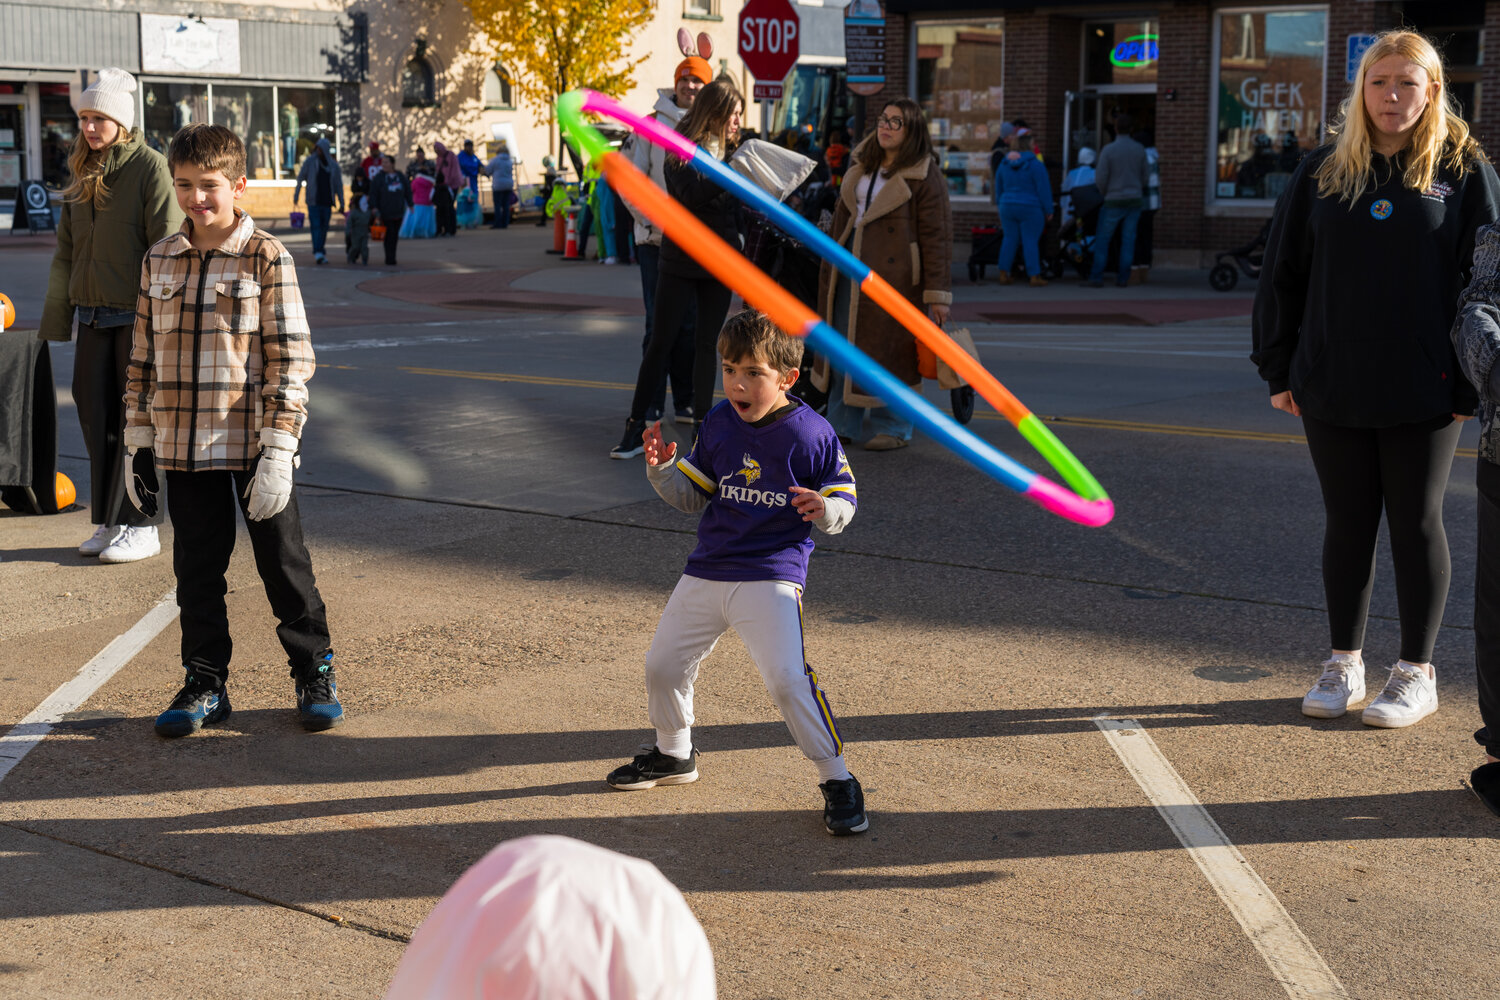 This young Vikings fan was extremely excited that he was able to get his hula-hoop over a ghost to win during the Candy Crawl.